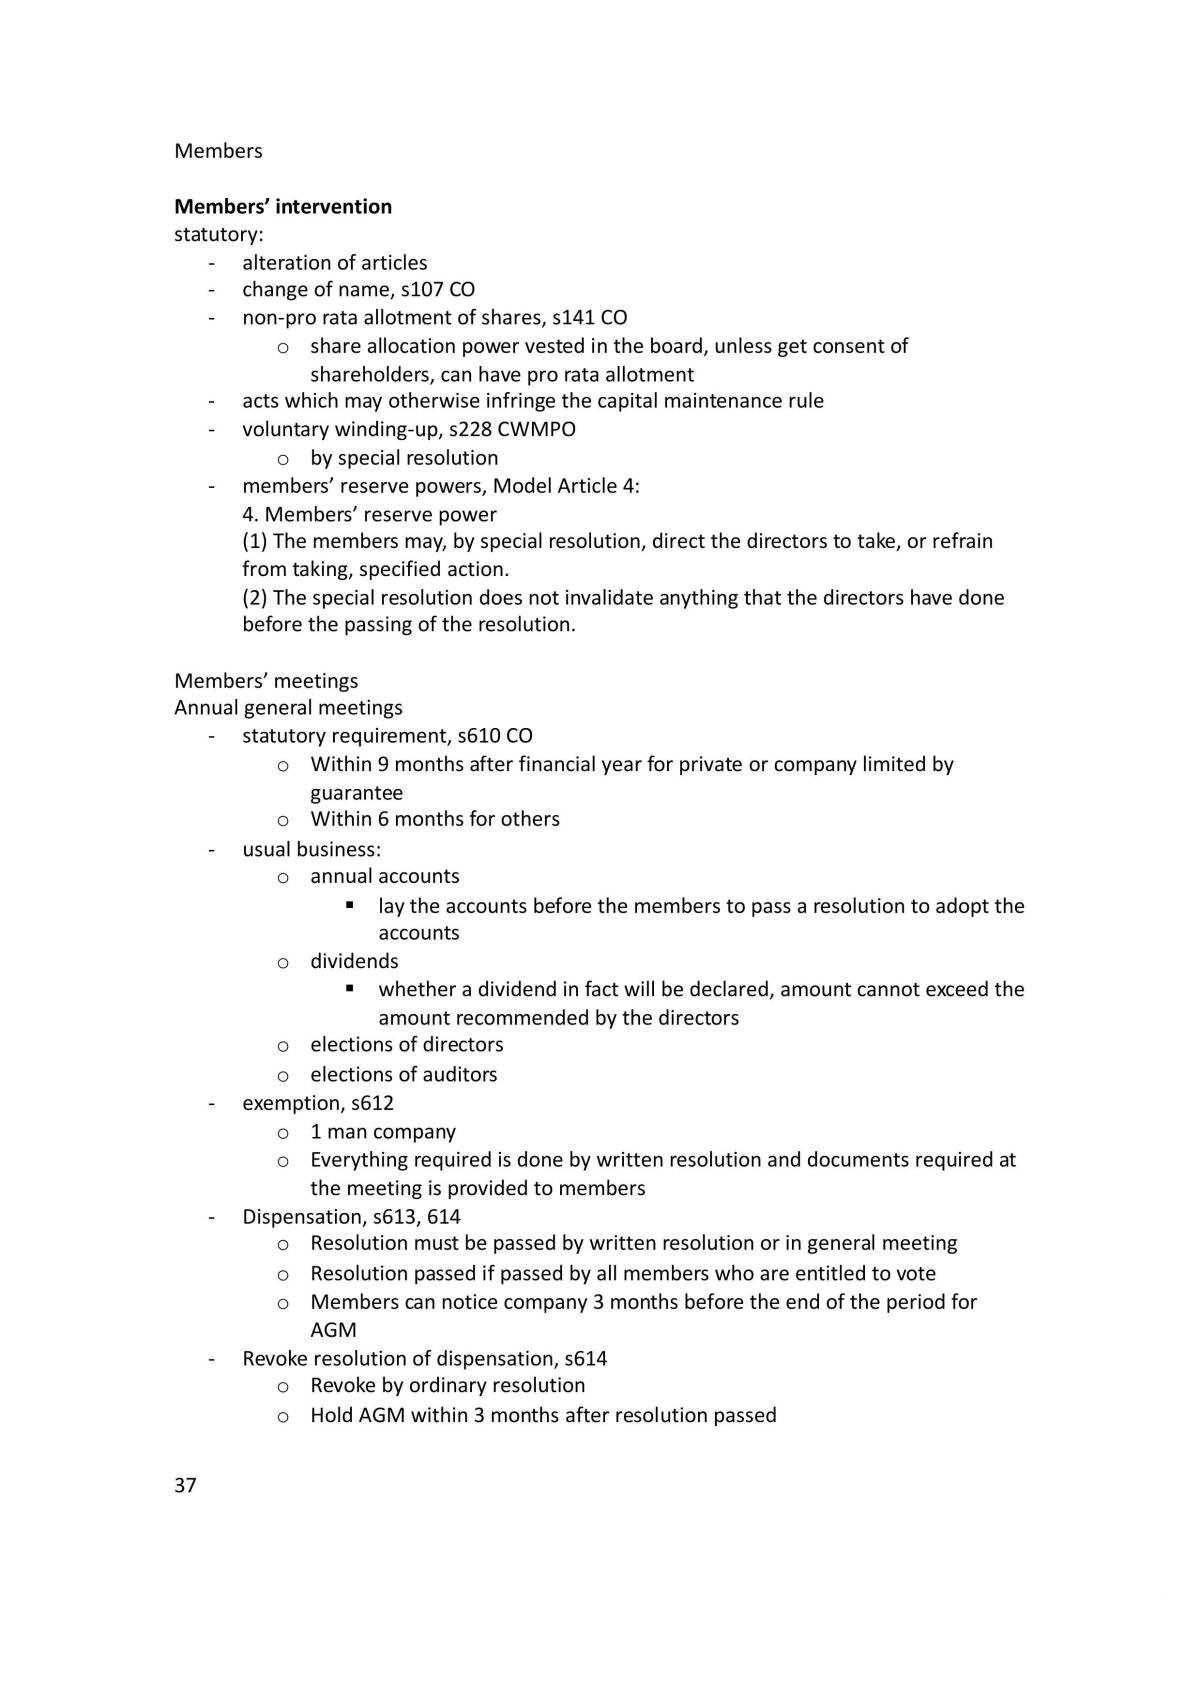 Company Law I Study Guide - Page 37